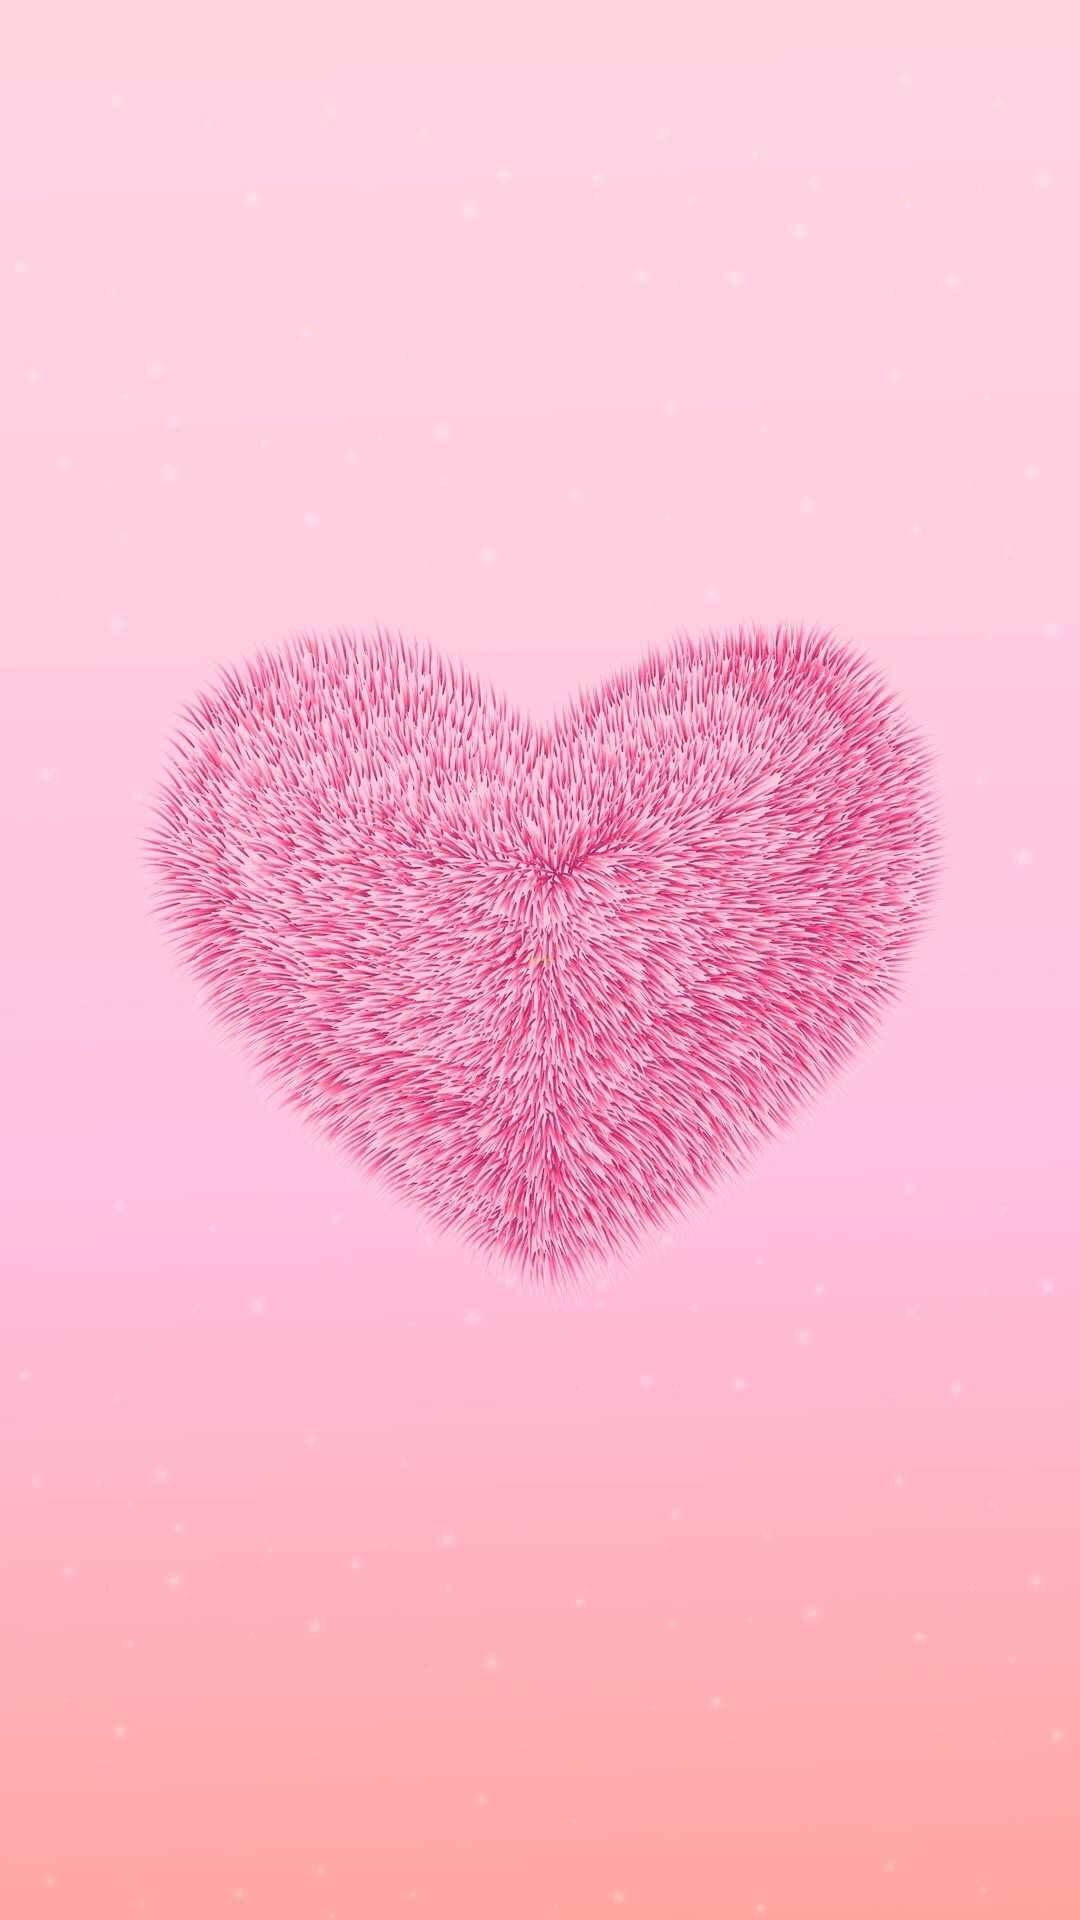 Pink Heart Wallpapers